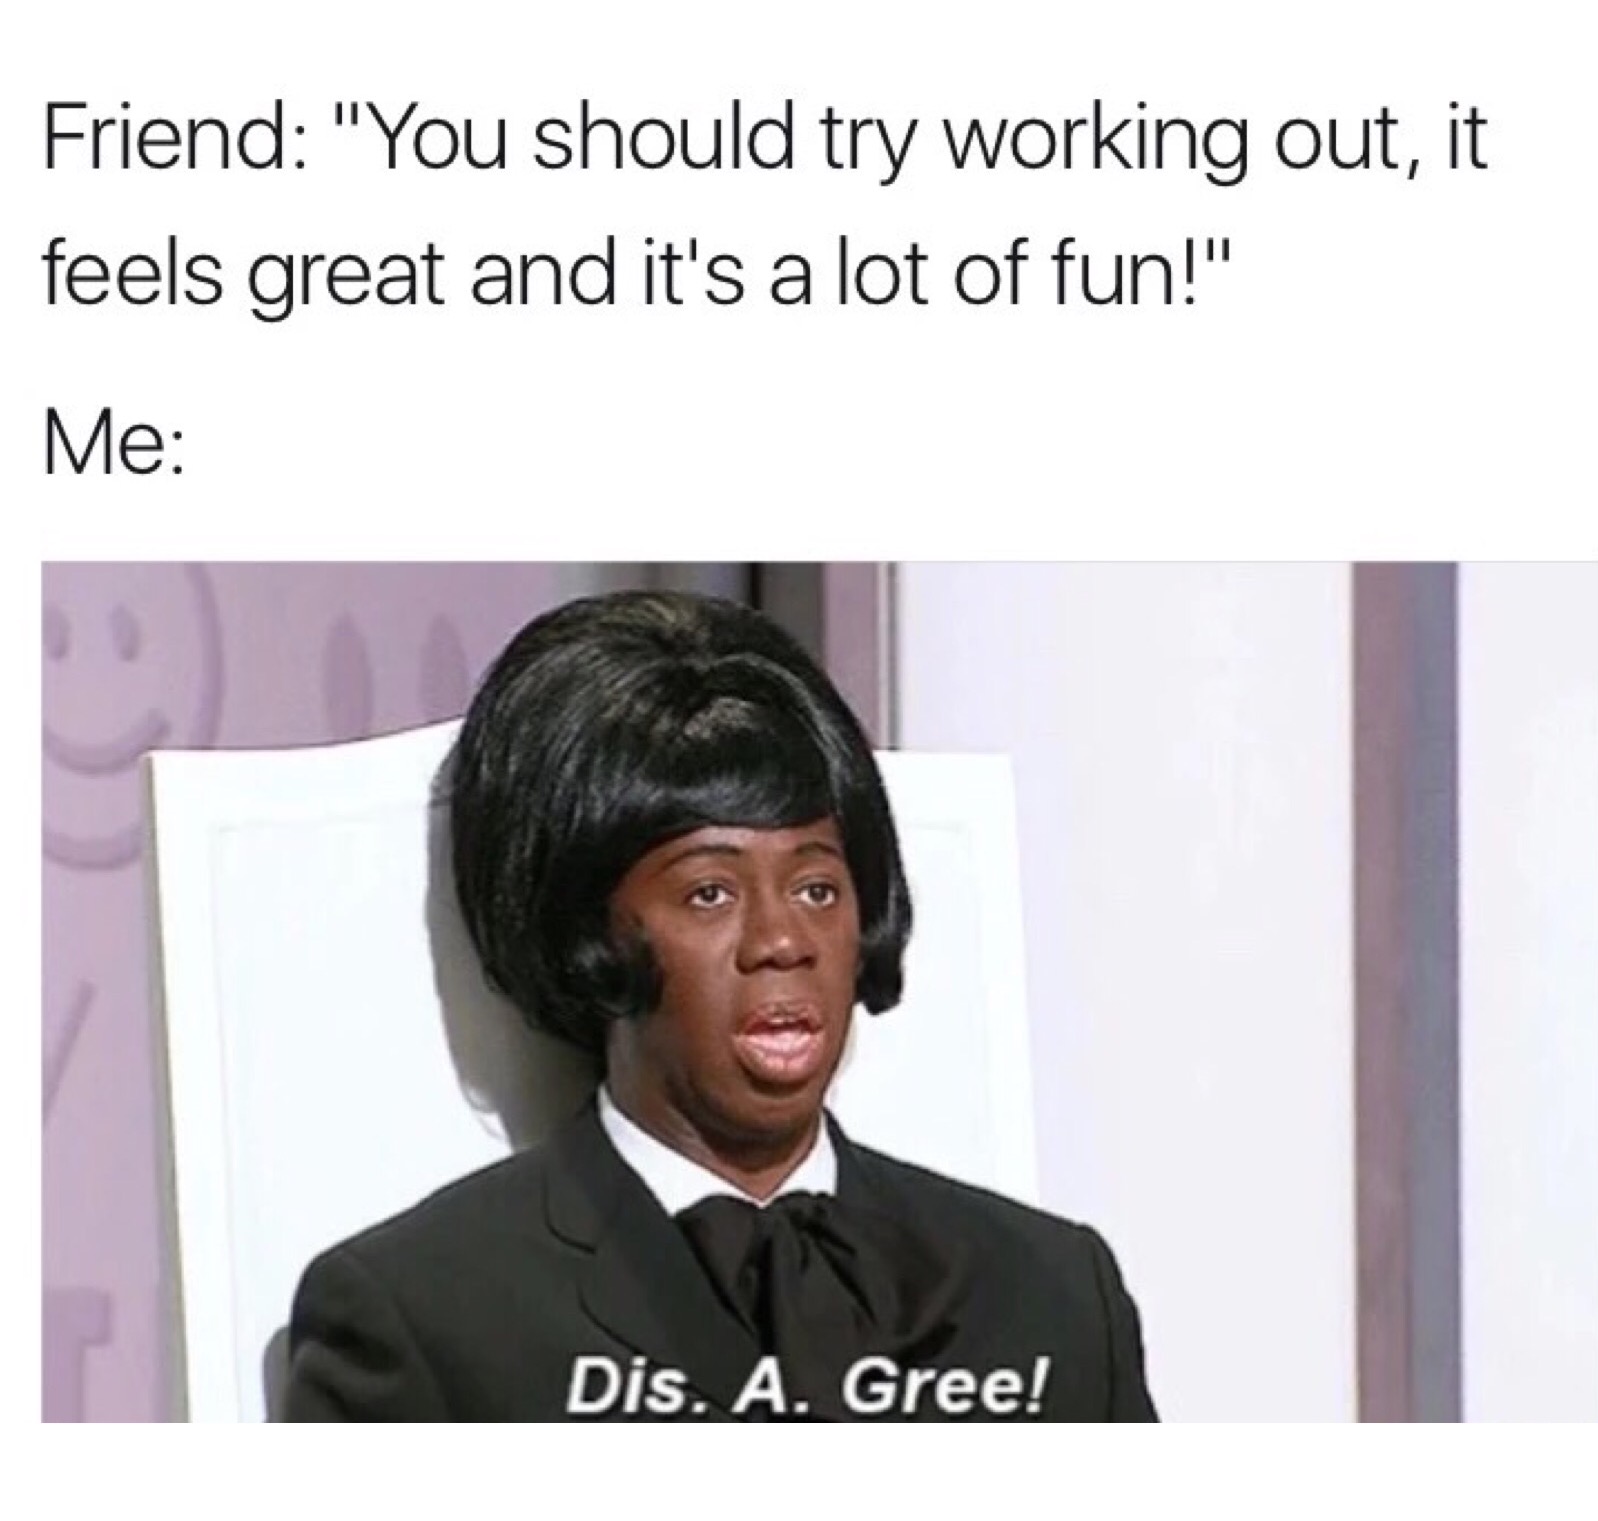 courtney from 13 reasons why memes - Friend "You should try working out, it feels great and it's a lot of fun!" Me Dis. A. Gree!